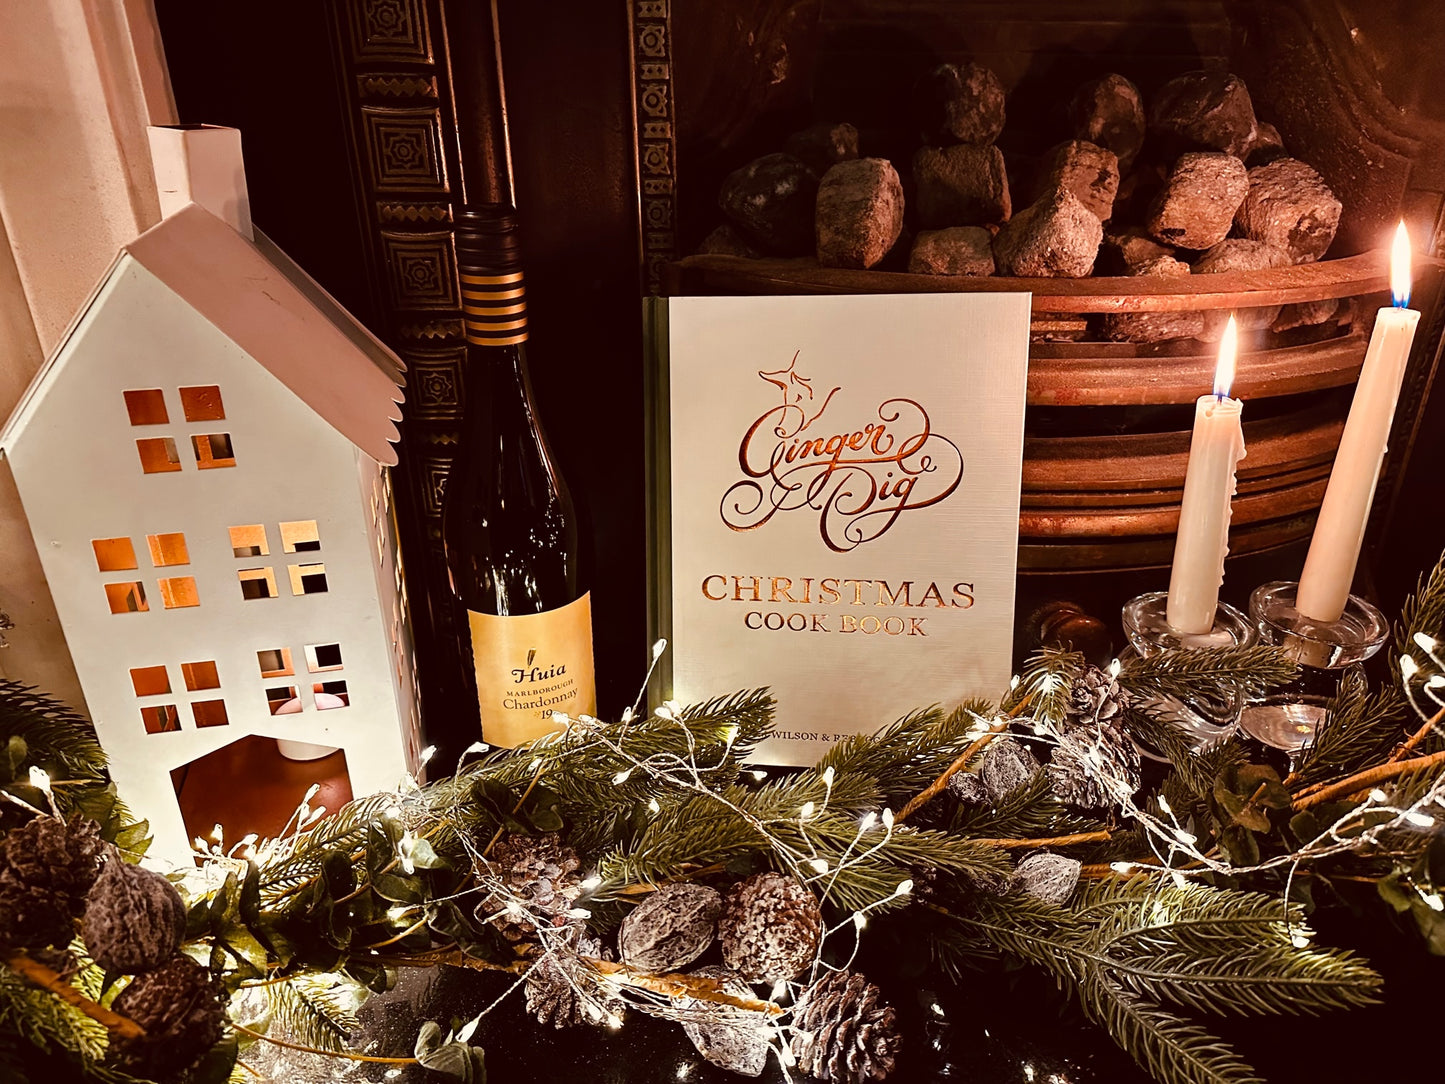 Ginger Pig Christmas Cook Book and Wine Pairing - Huia Chardonnay New Zealand, 2019